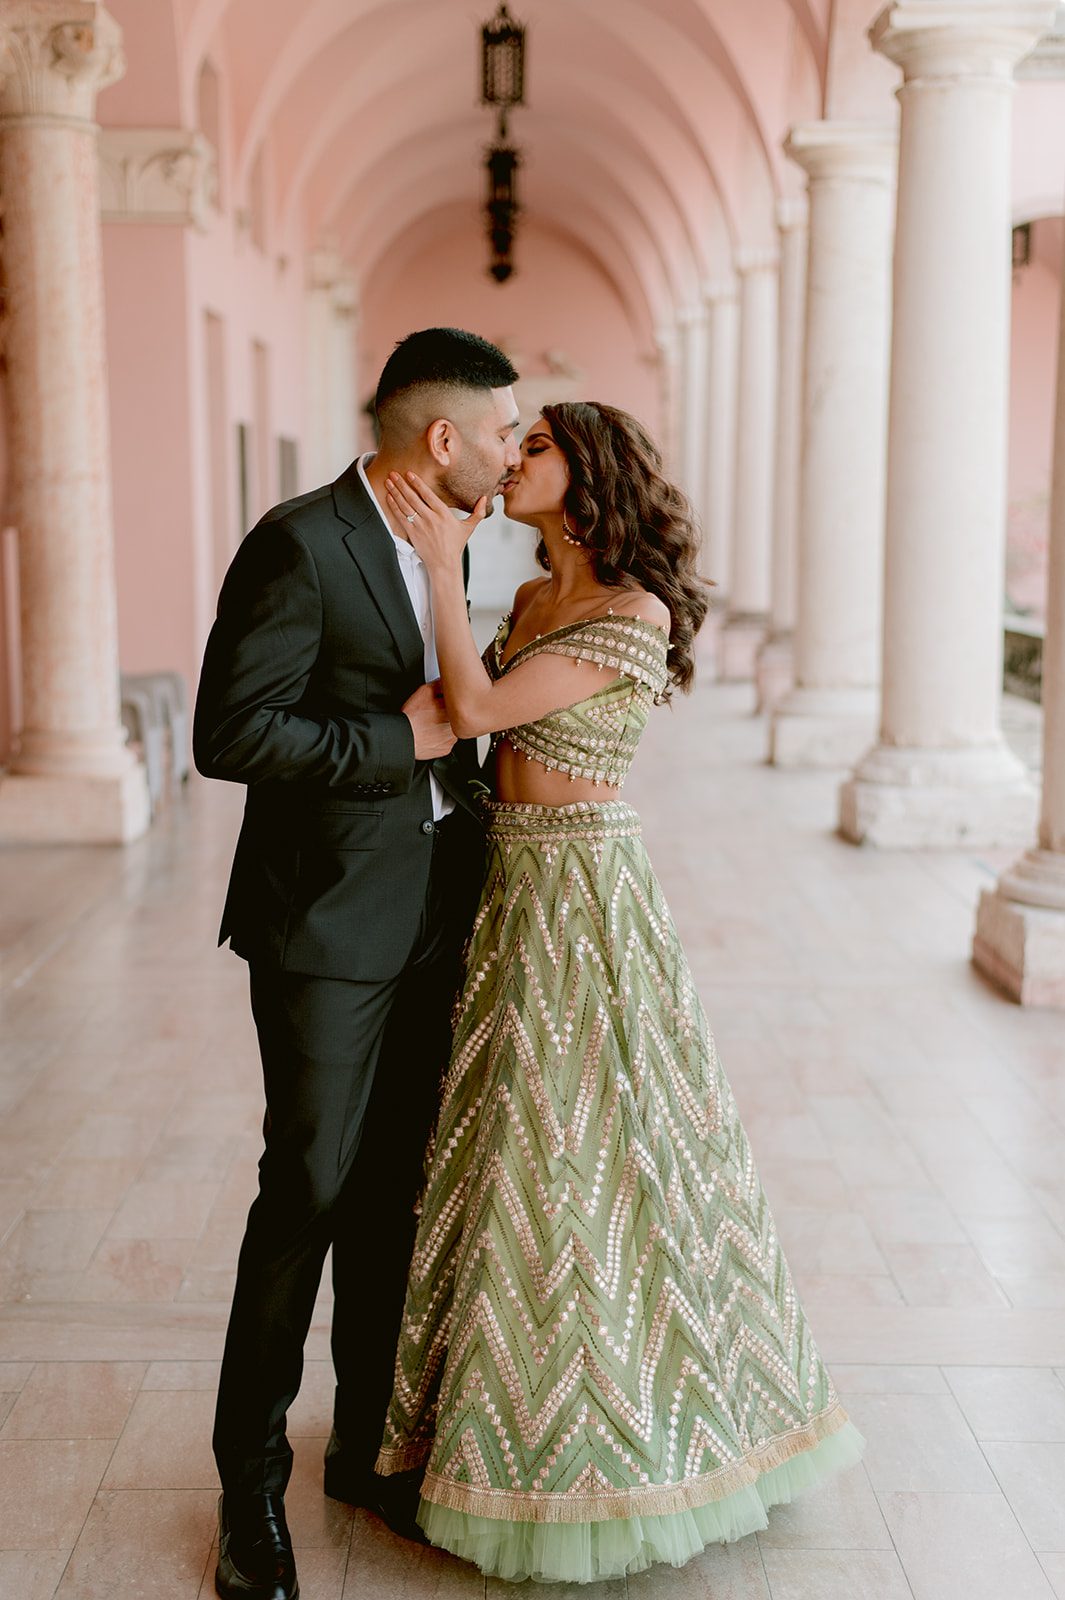 "Elegant and romantic Ringling Museum engagement session with Indian attire"
